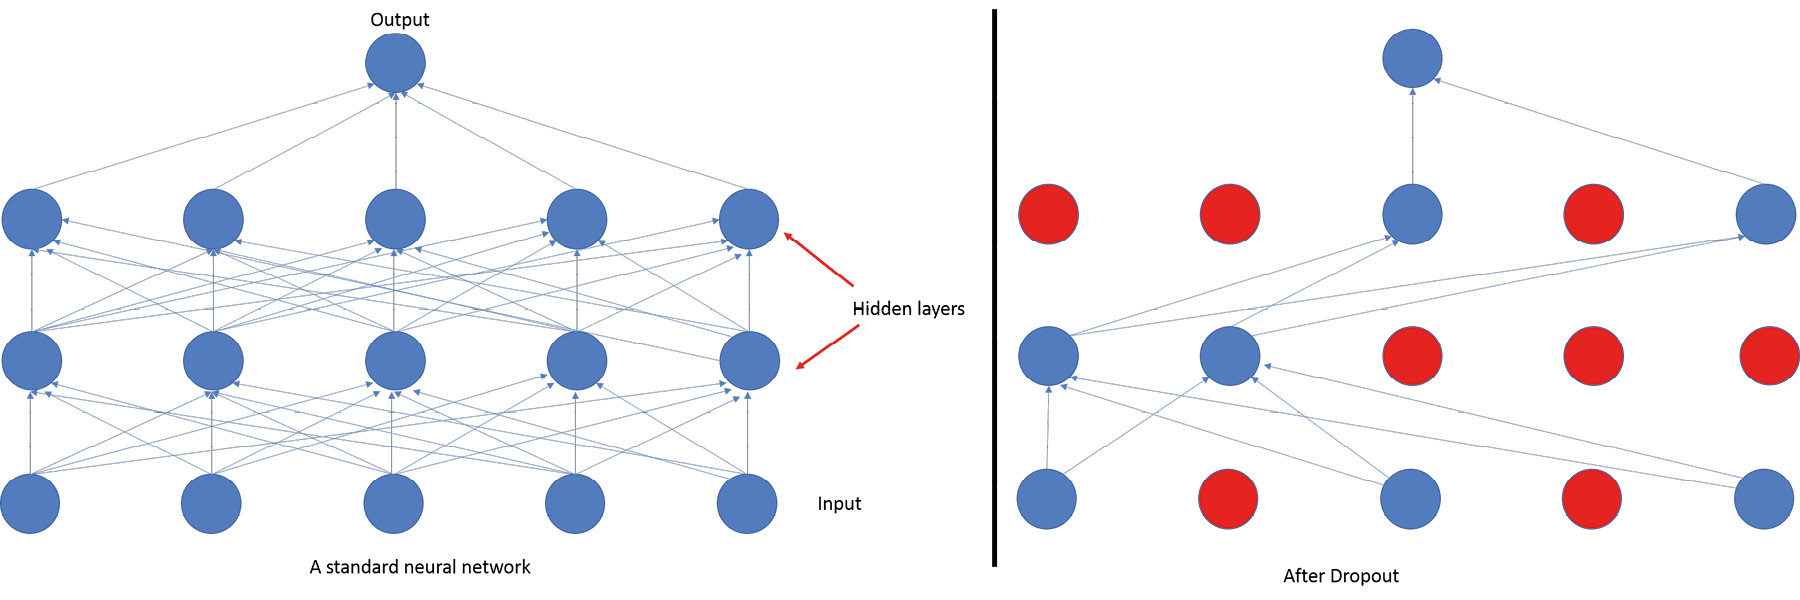 Figure 6.14: Visualizing dropout in a dense neural network
